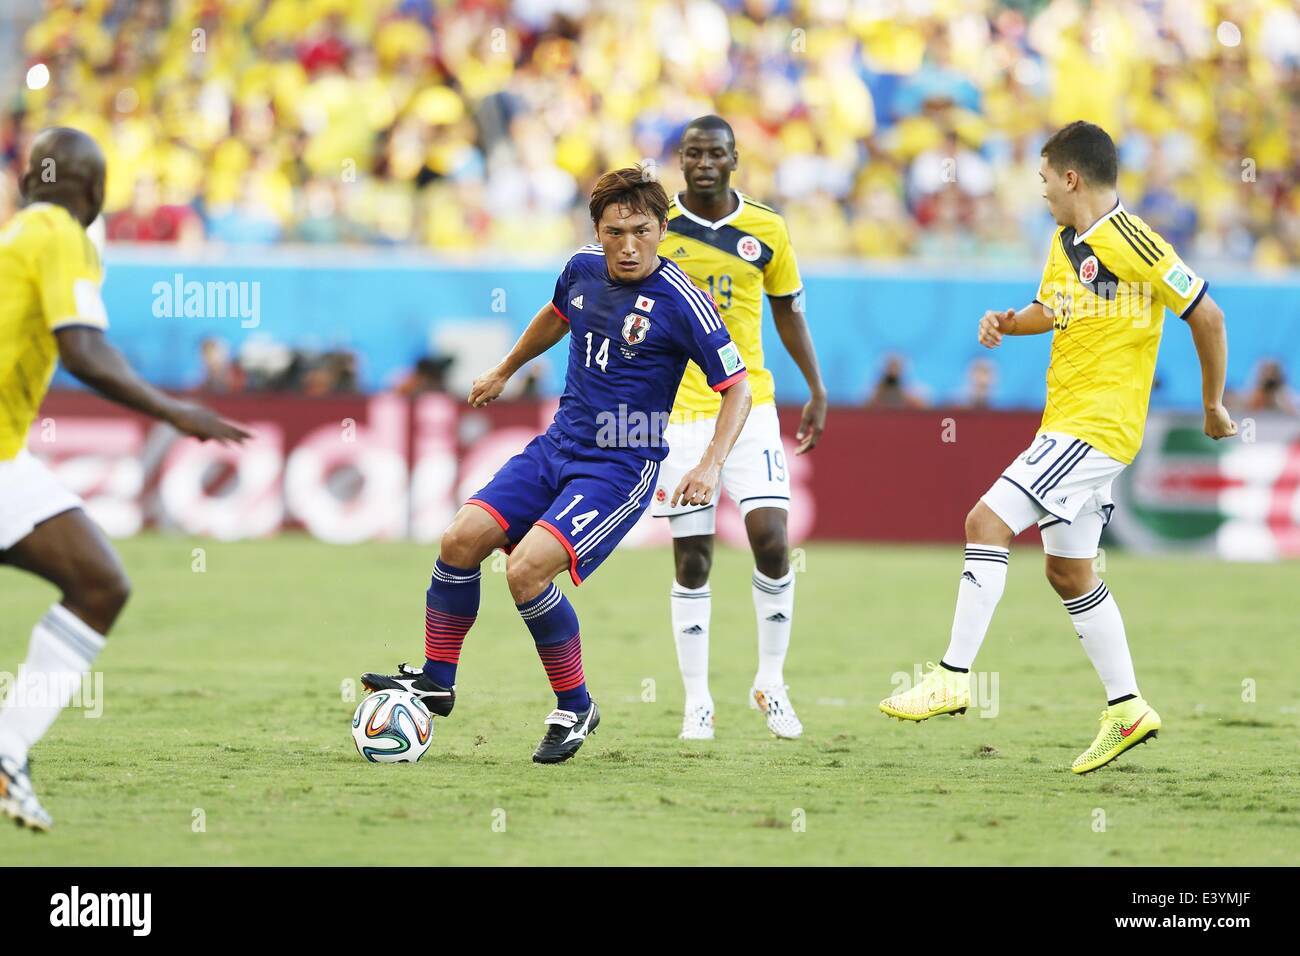 Cuiaba, Brazil. 24th June, 2014. Toshihiro Aoyama (JPN) Football/Soccer : FIFA World Cup Brazil 2014 Group C match between Japan 1-4 Colombia at the Arena Pantanal in Cuiaba, Brazil . © AFLO/Alamy Live News Stock Photo